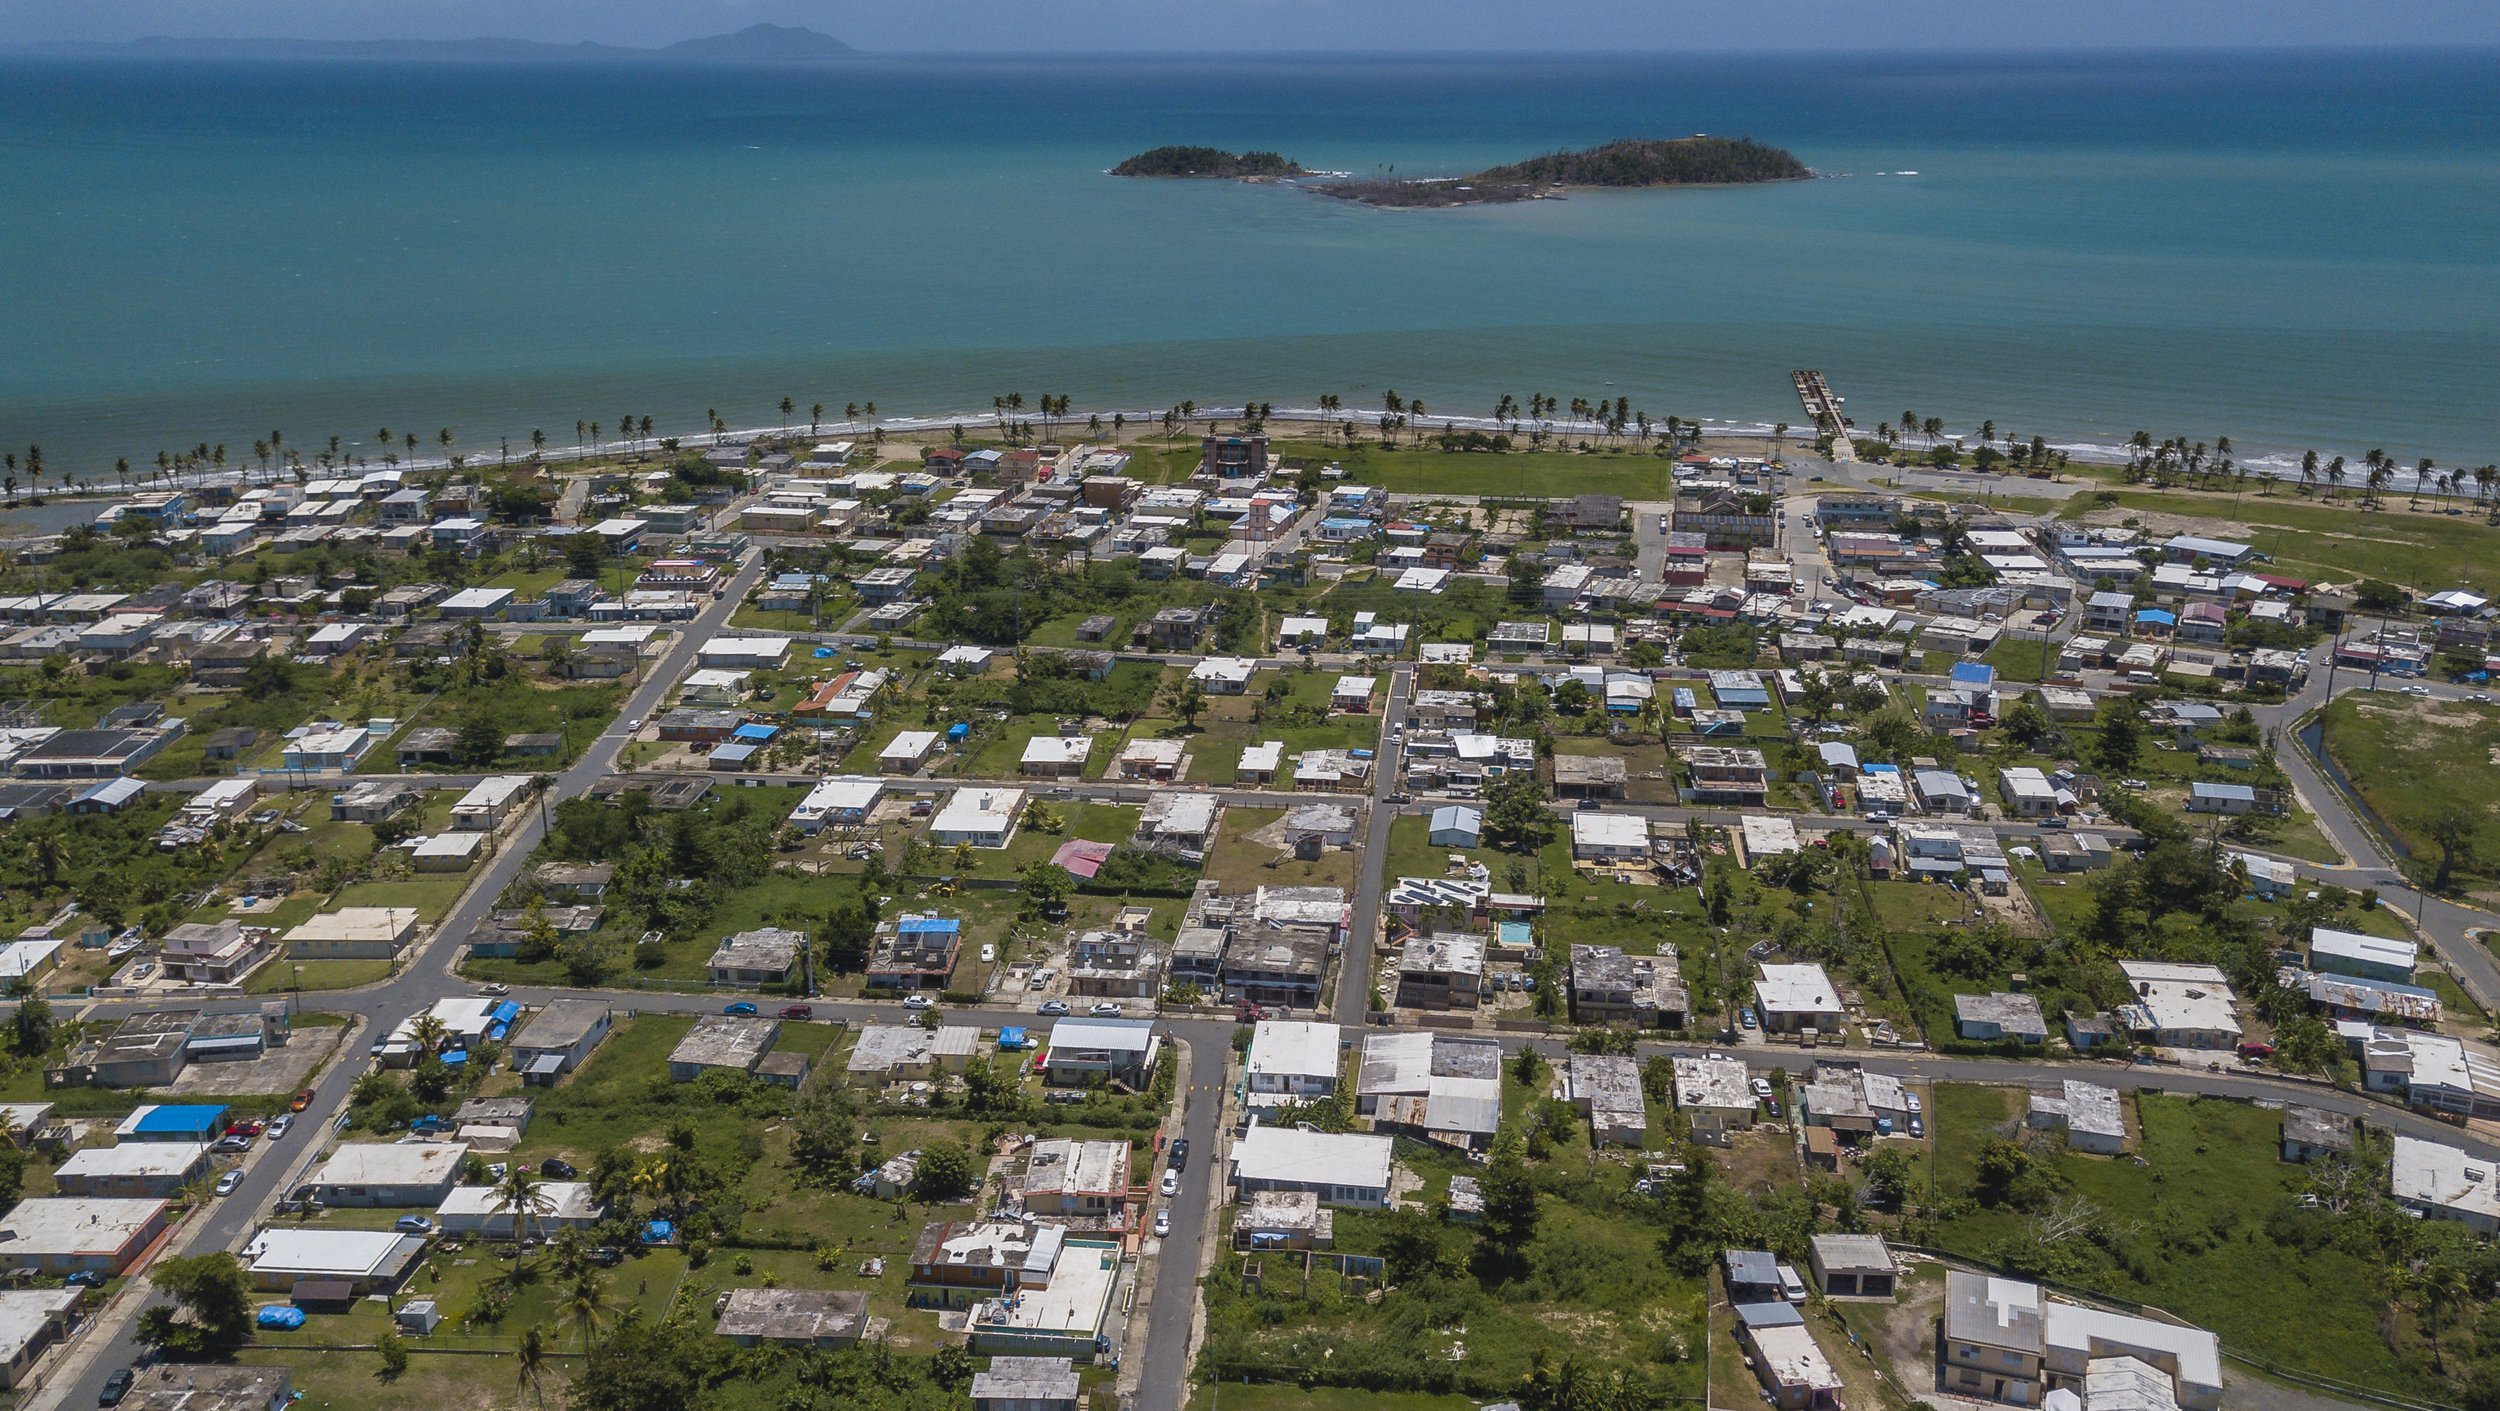  Punta Santiago, Humacao on August 23, 2018. Hurricane Maria devastated the seaside community and a year later homes with blue tarps await new roofs. 